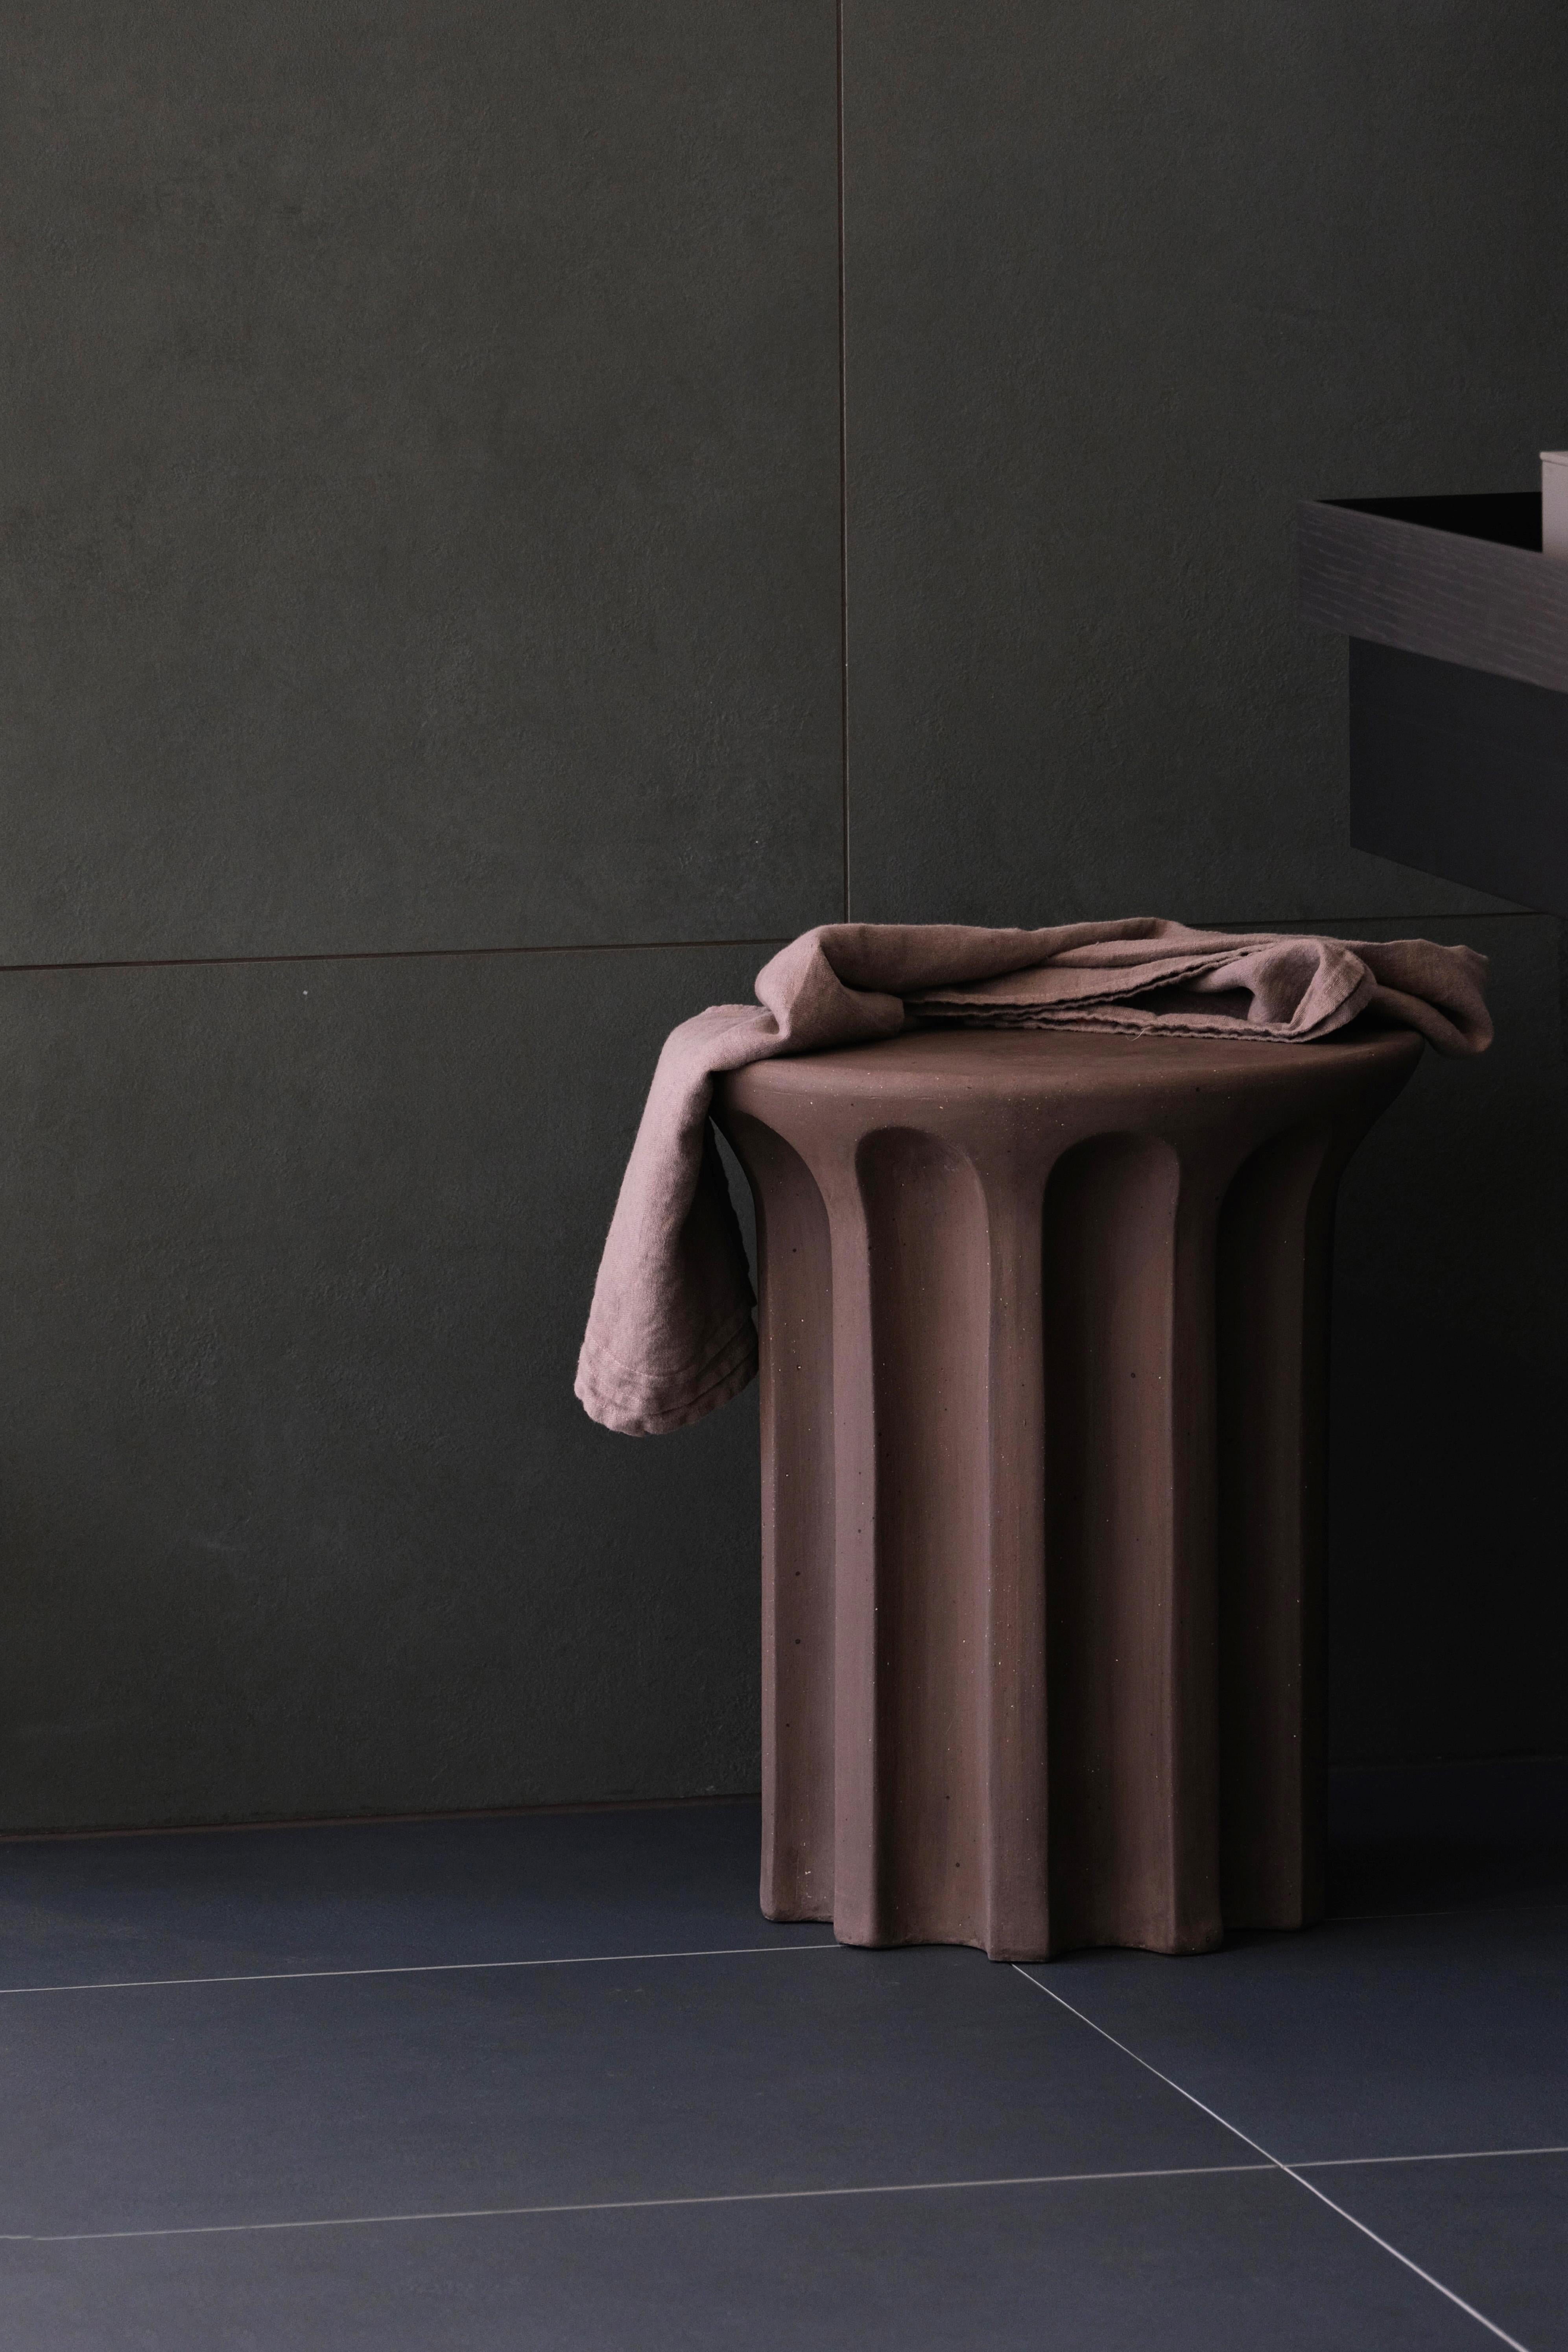 A robust terracotta side table featuring a revolving carousel of voids that call to mind the shapes used in architecture and design for centuries. A contemporary exploration of classical form that celebrates the history and legacy of this natural